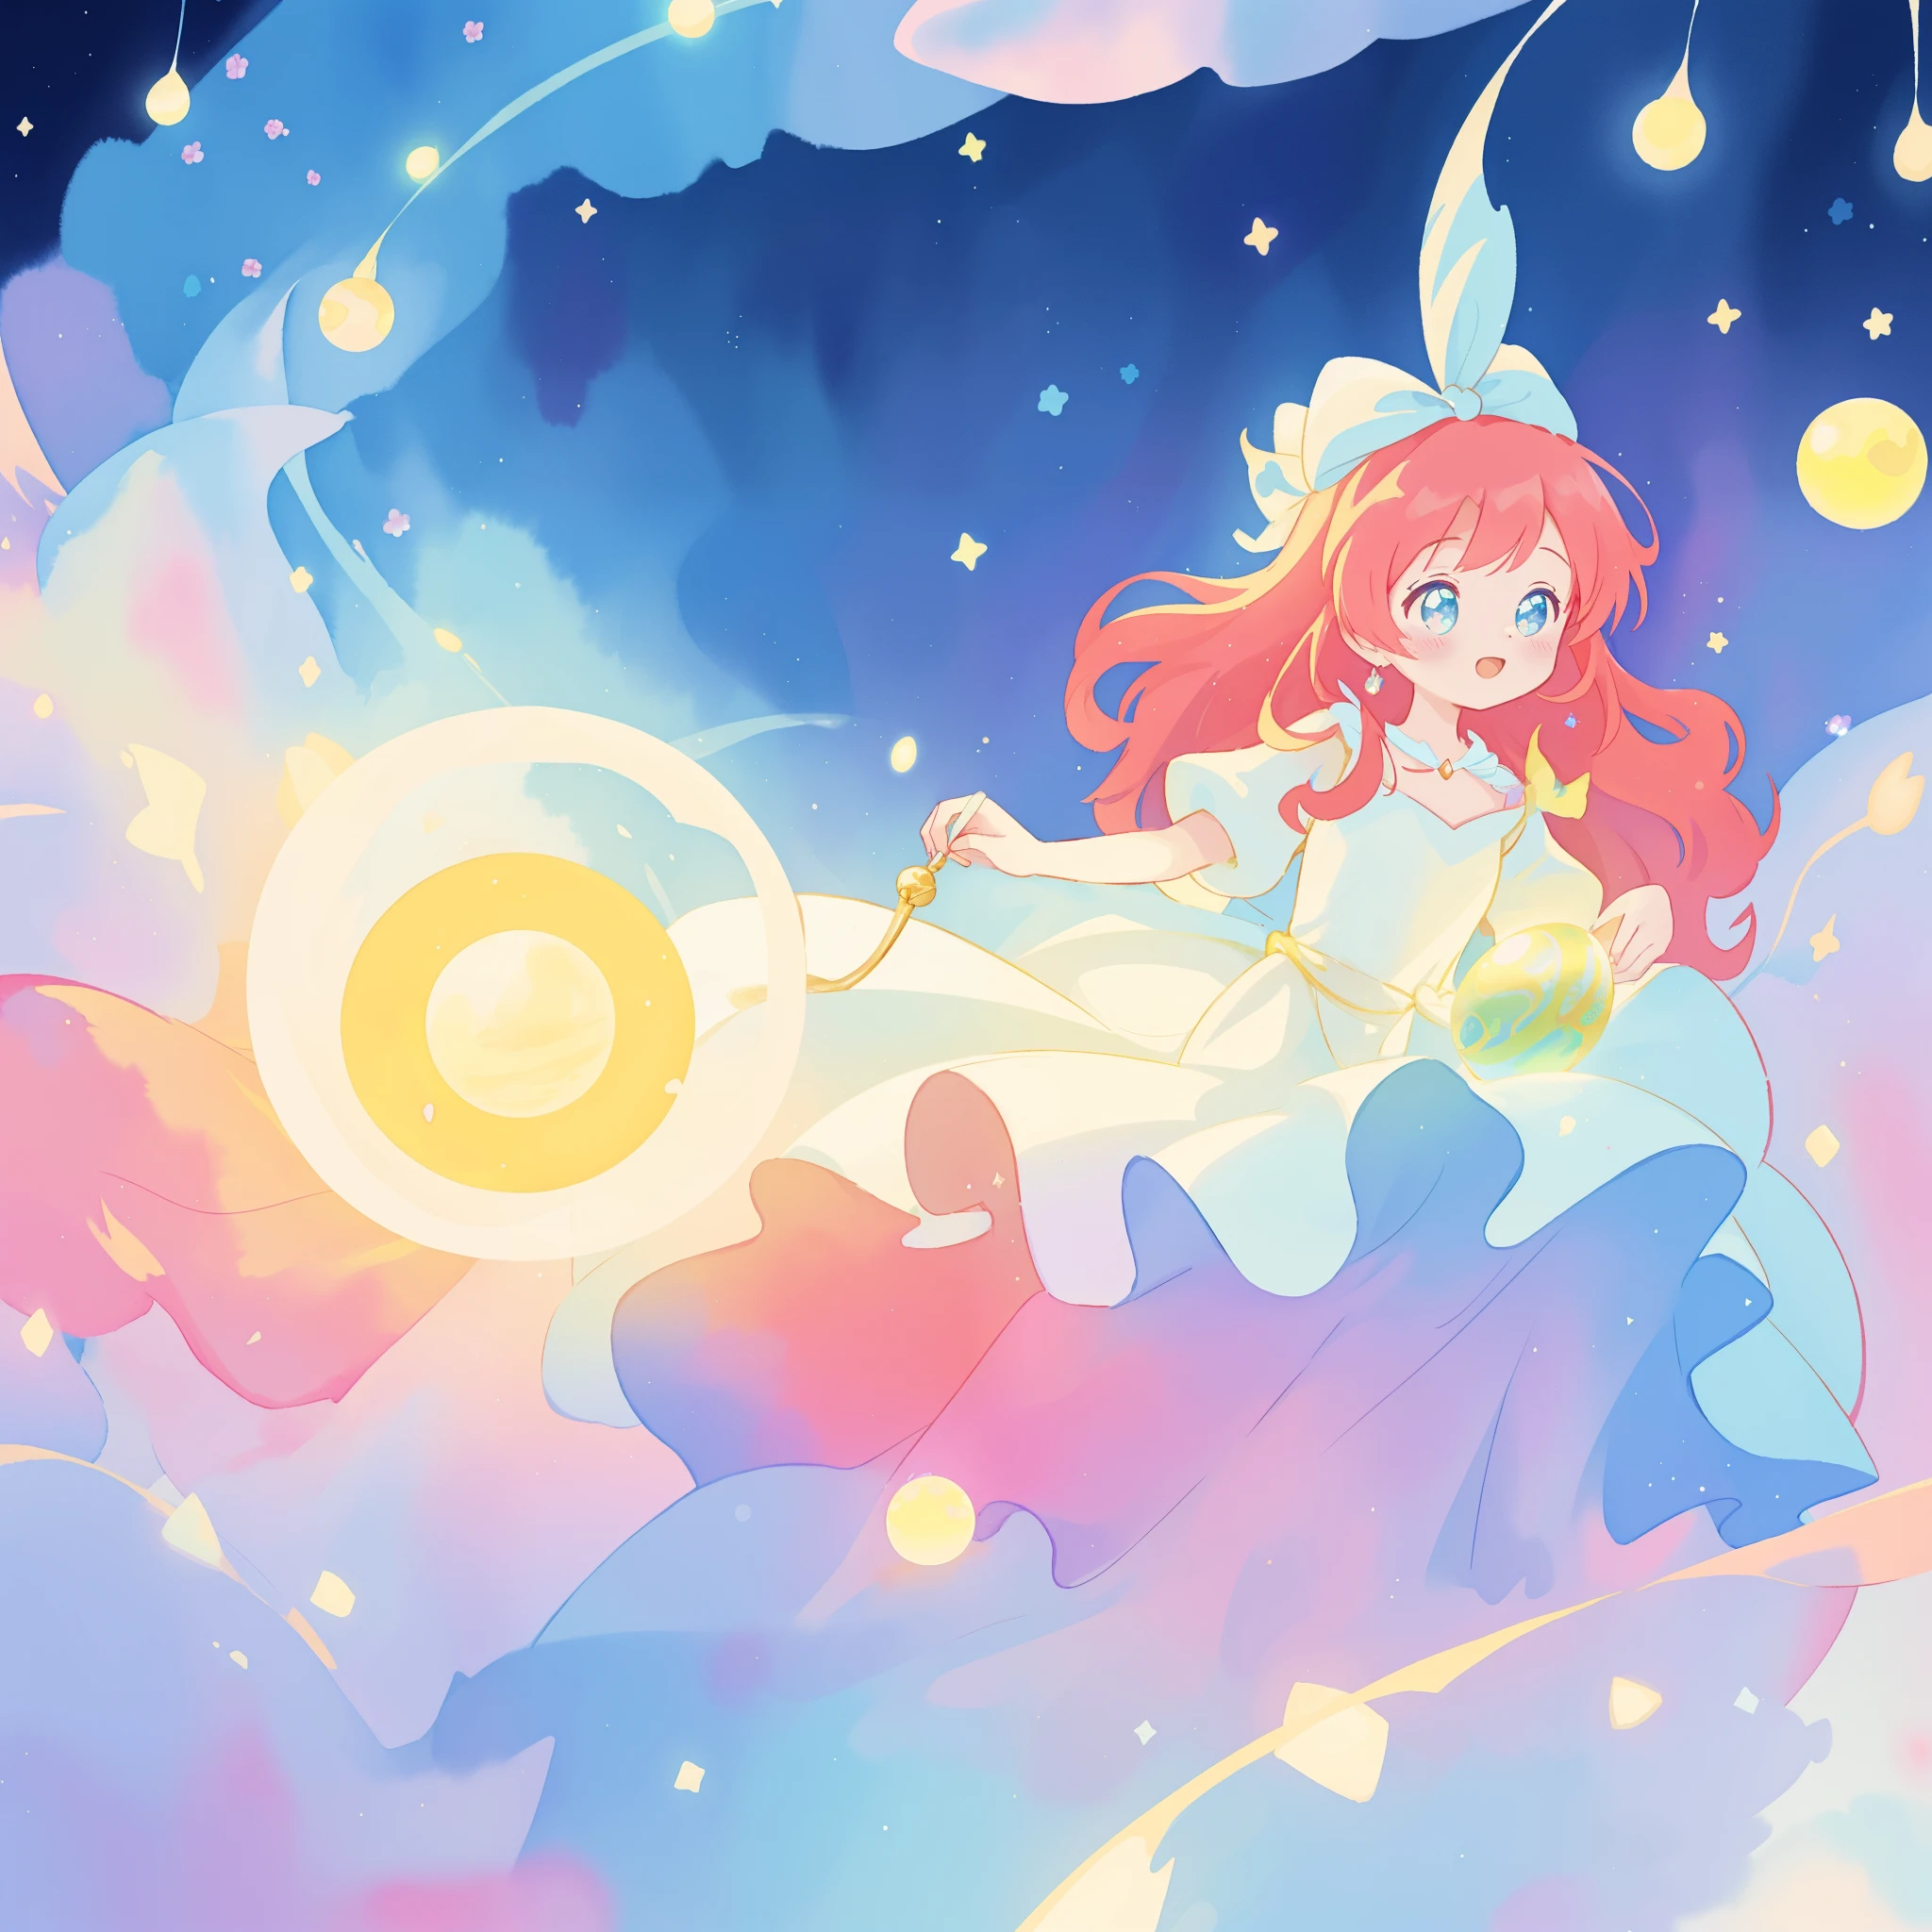 beautiful girl in sparkling white dress holding a magical sphere, ((sparkling puffy layered ballgown)), (magical, whimsical), (glowing magical orb), long flowing colorful hair, colorful fantasia background, watercolor illustration, disney art style, glowing aura around her, glowing lights, beautiful digital illustration, fantasia otherworldly landscape plants flowers, beautiful, masterpiece, best quality, anime disney style